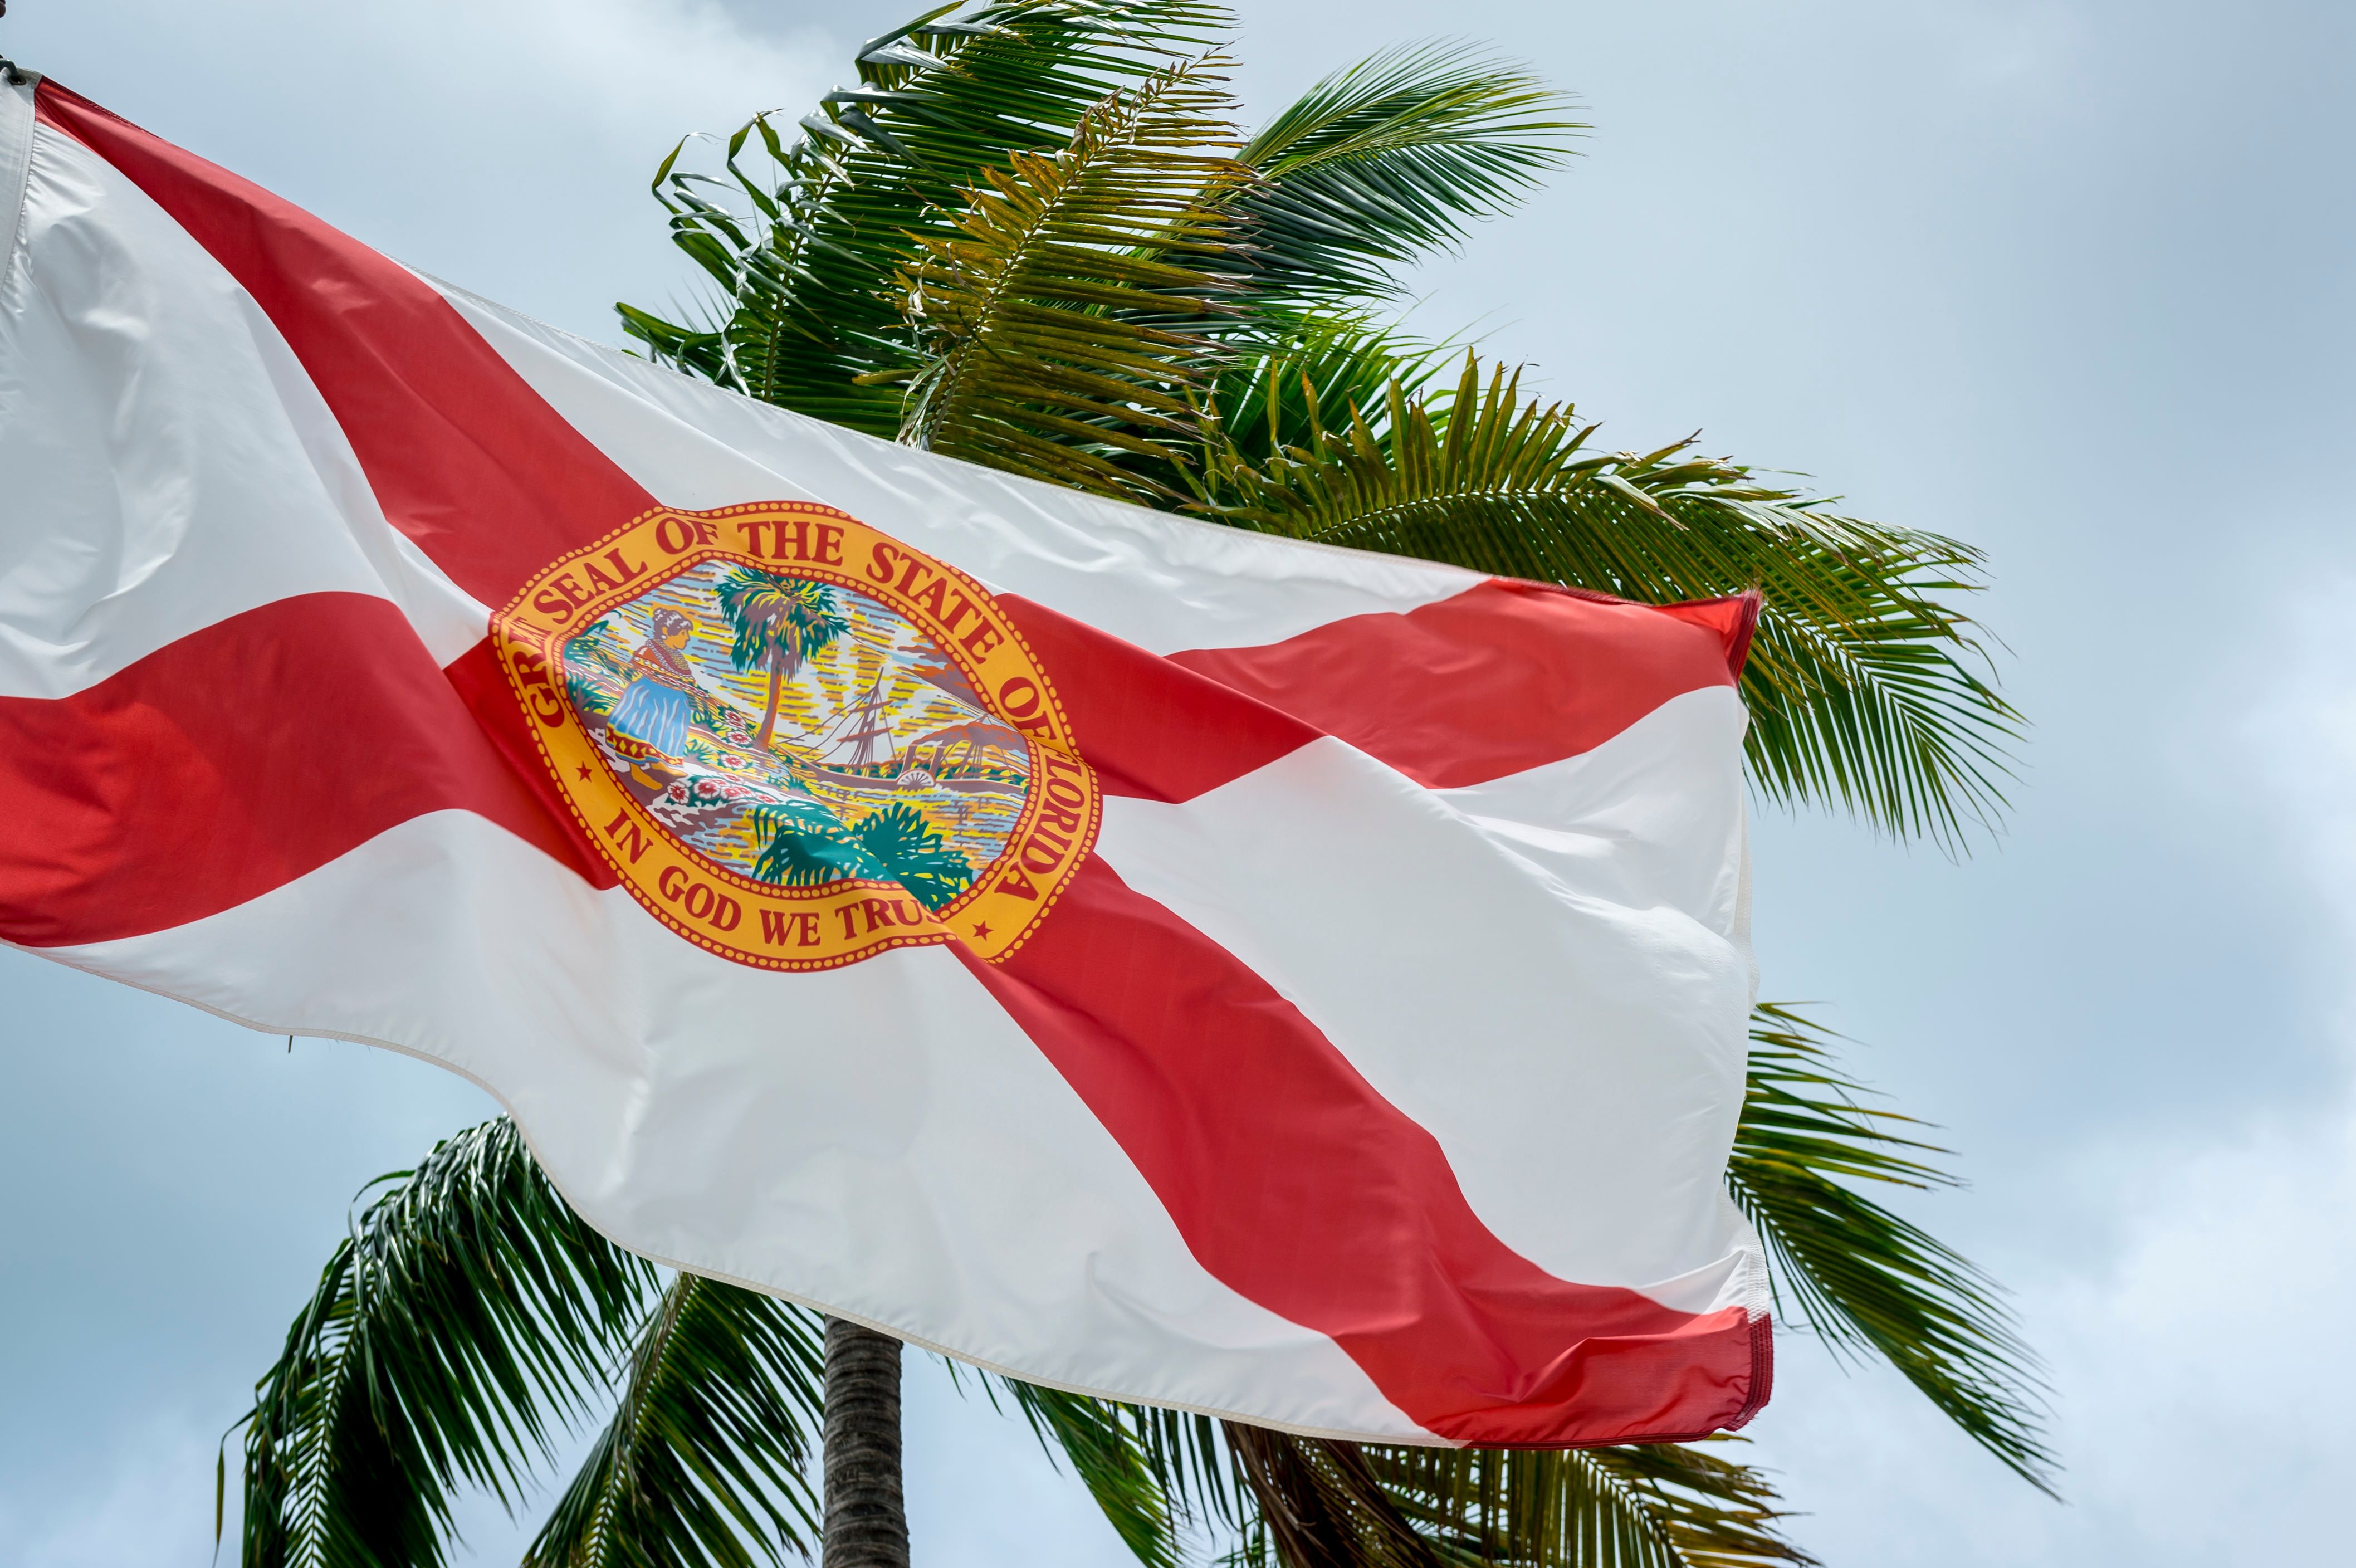 Flag of state of Florida flying in front of a palm tree